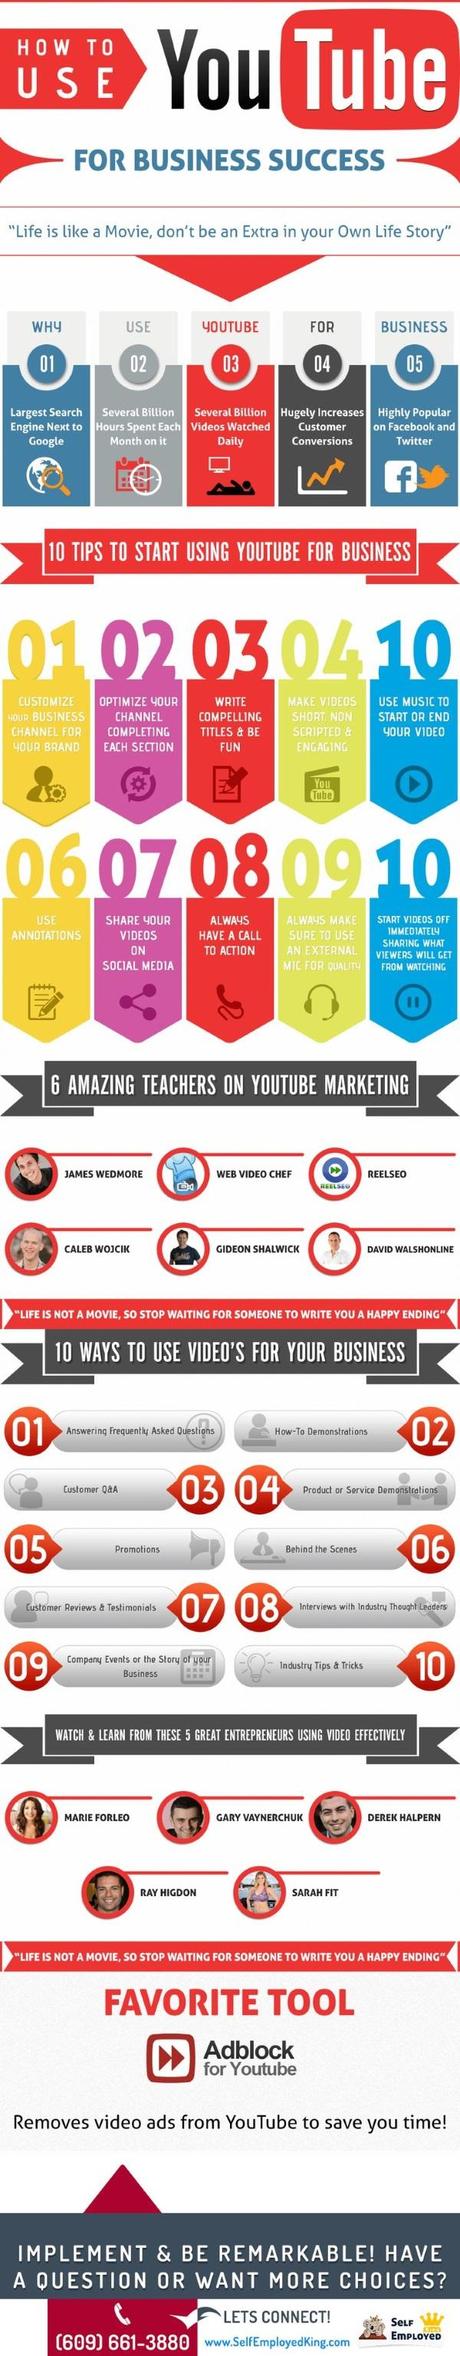 Video Marketing - How to use Youtube - Social With It